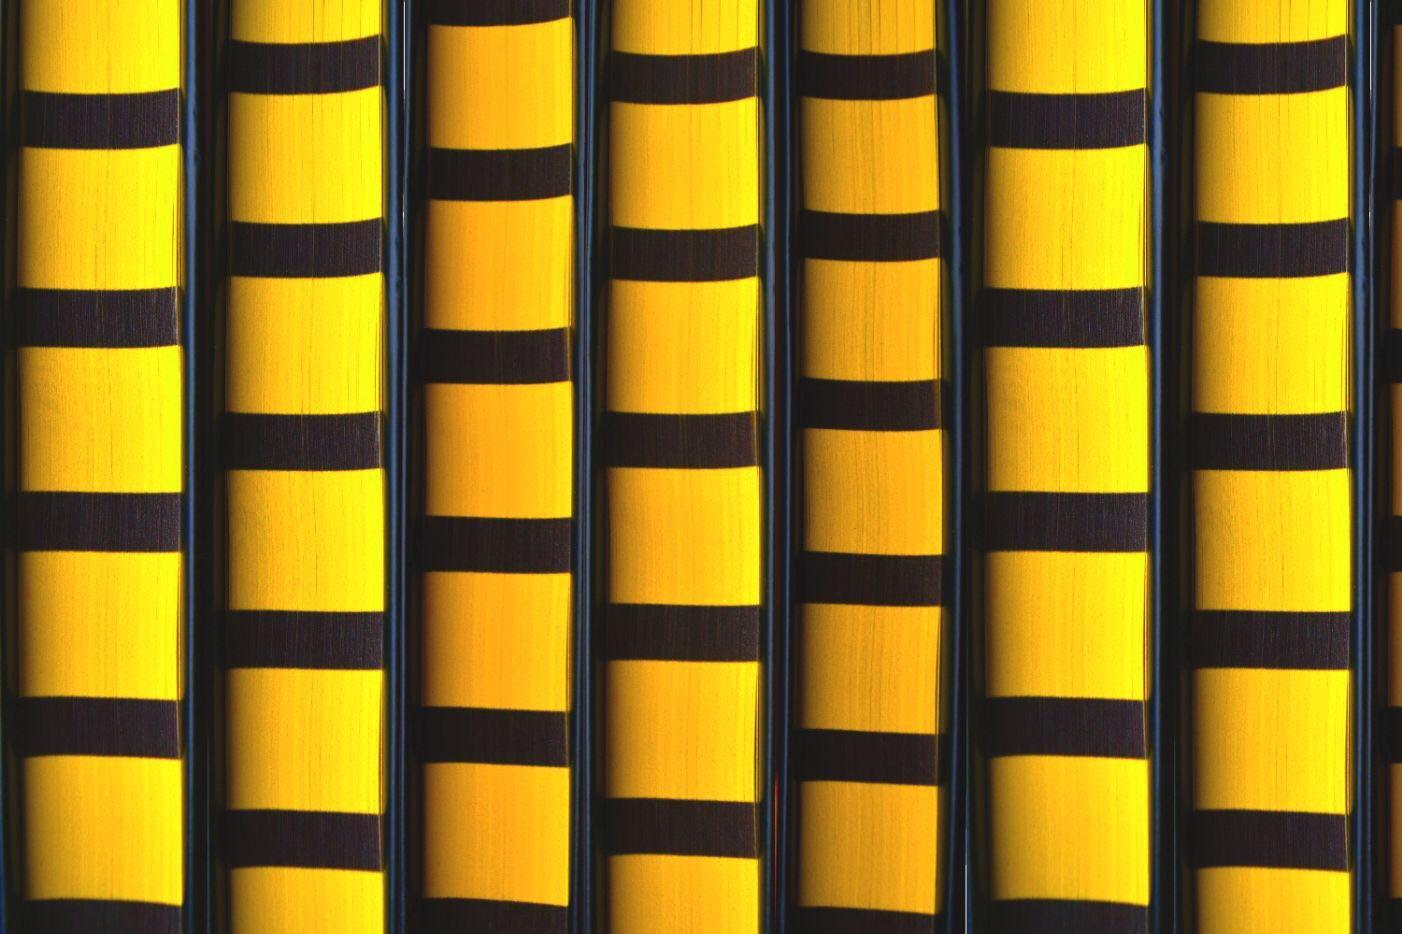 Hufflepuff wallpaper made from copies of the limited edition book